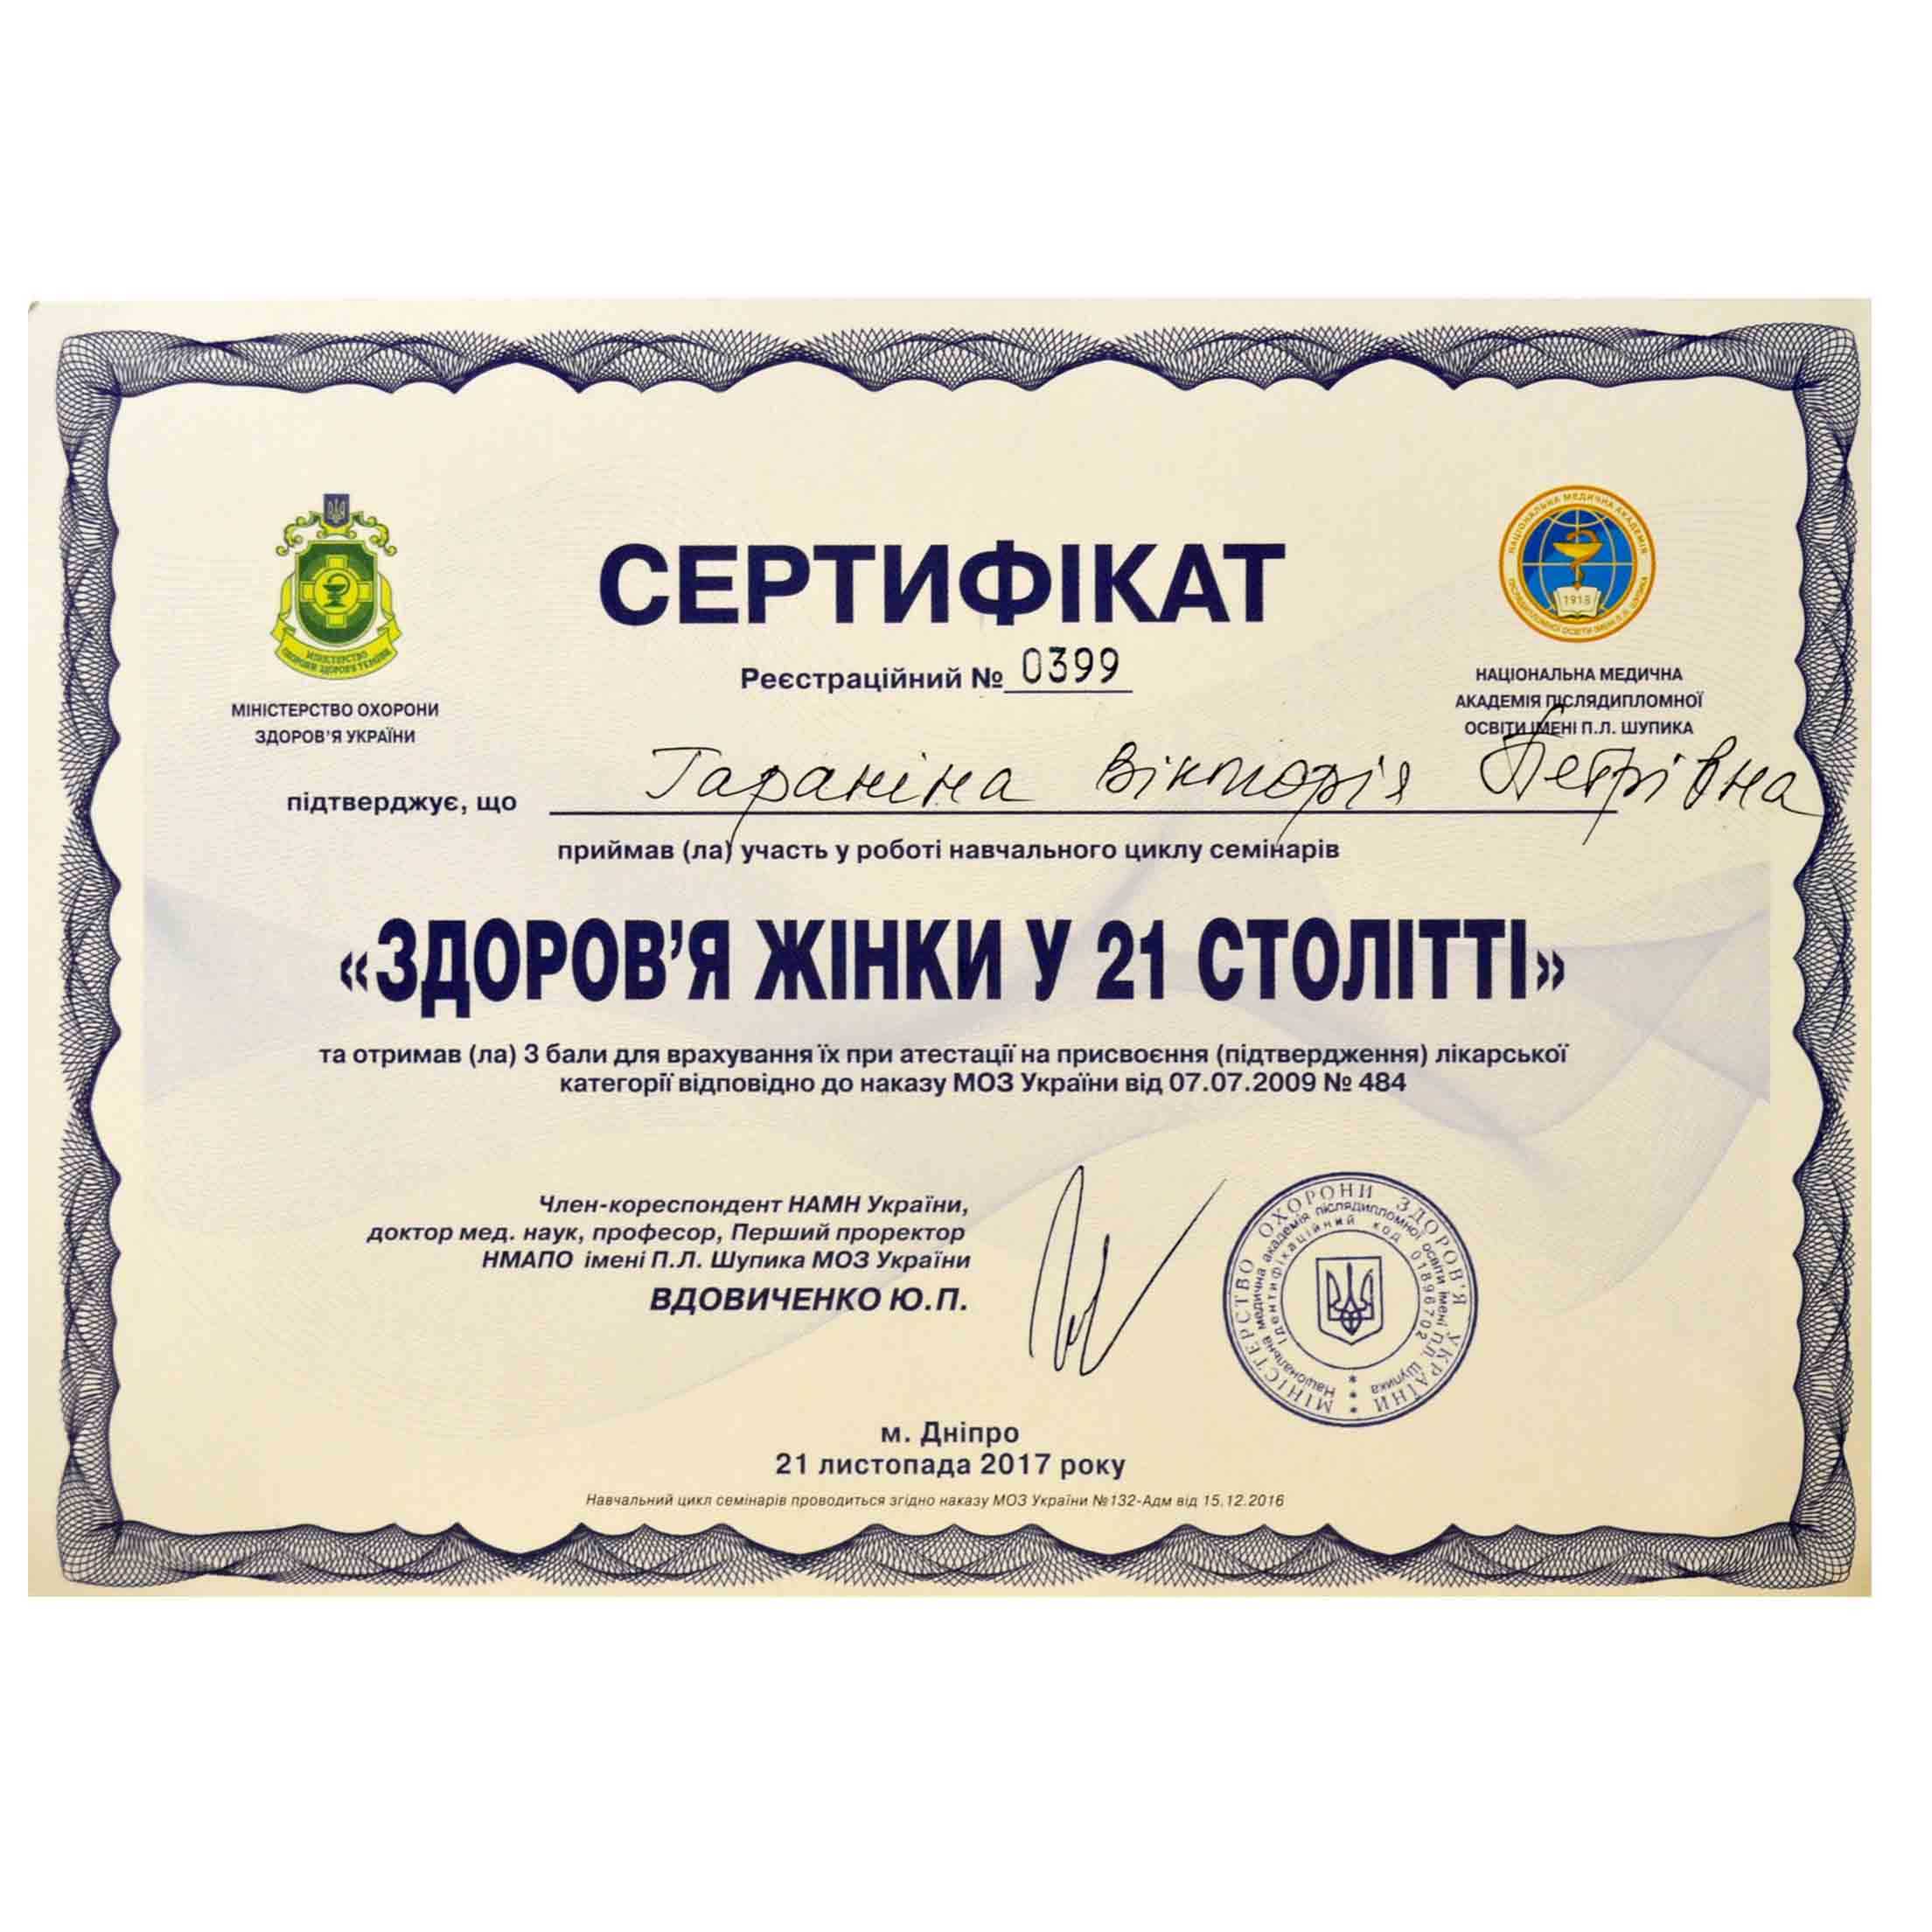 Гаранина Виктория Петровна | Mediclub Pertaining To No Certificate Templates Could Be Found